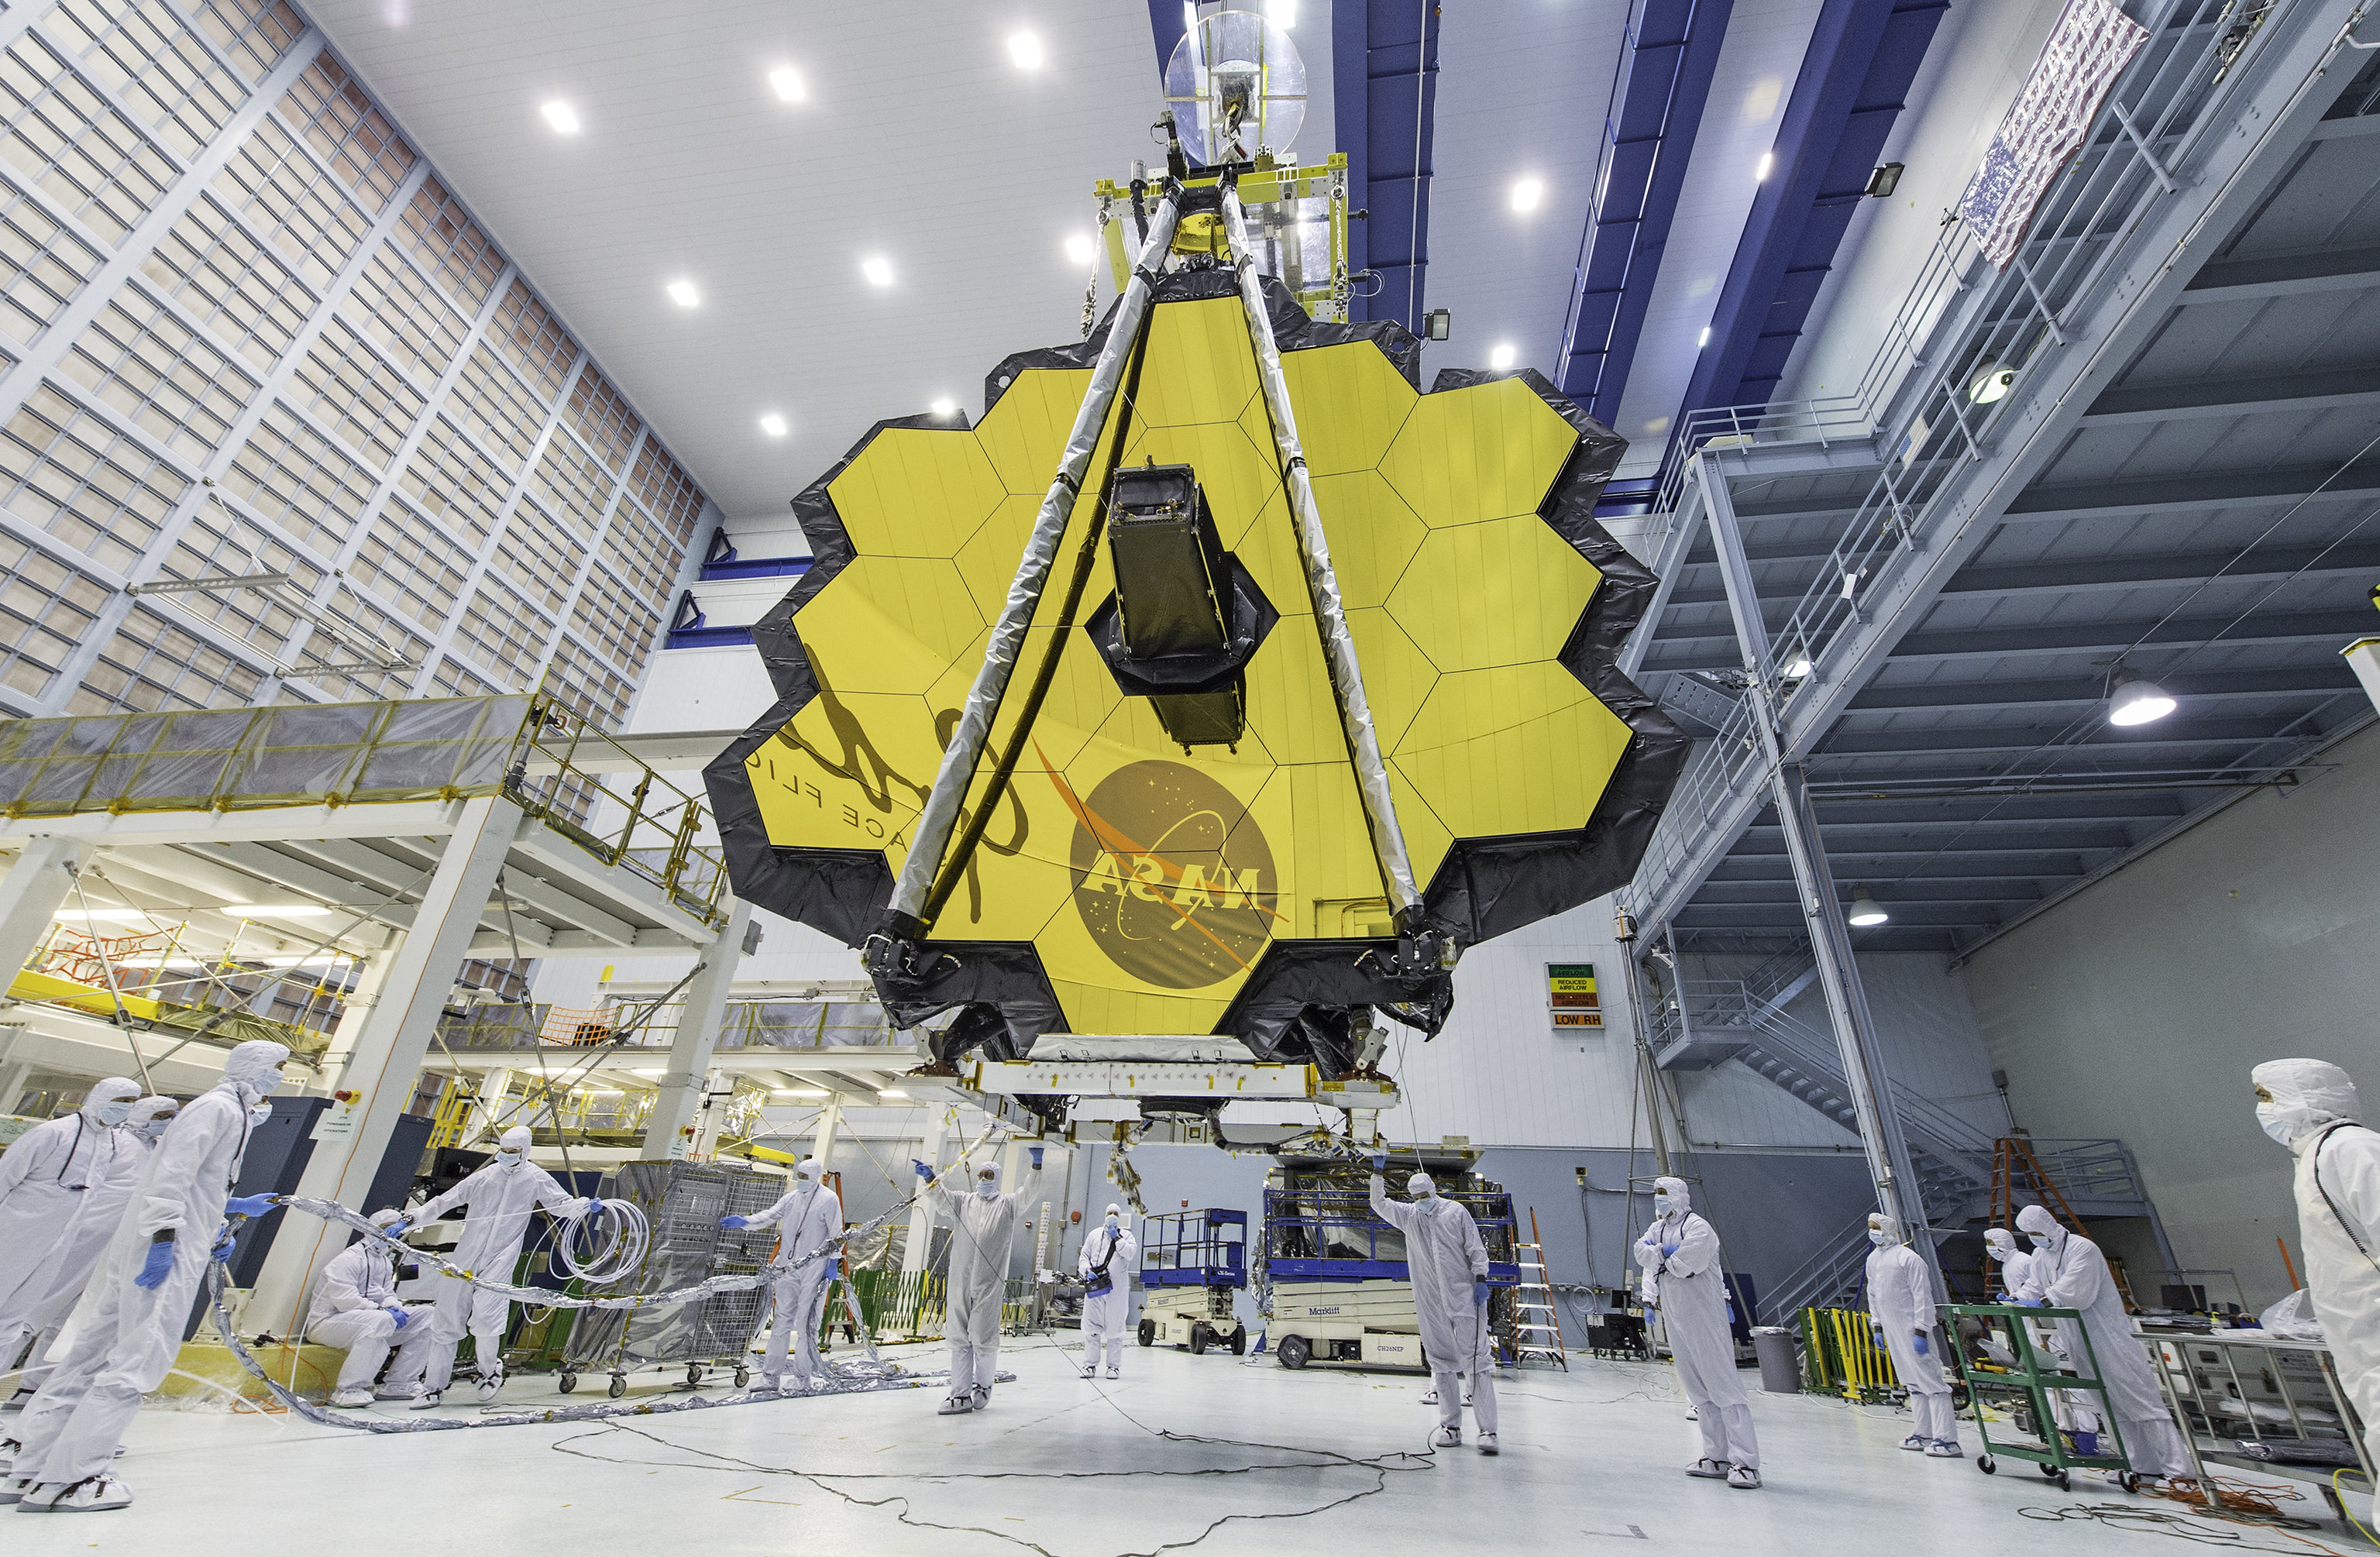 NASA technicians lifted the telescope using a crane and moved it inside a clean room at NASA’s Goddard Space Flight Center in Greenbelt, Maryland.